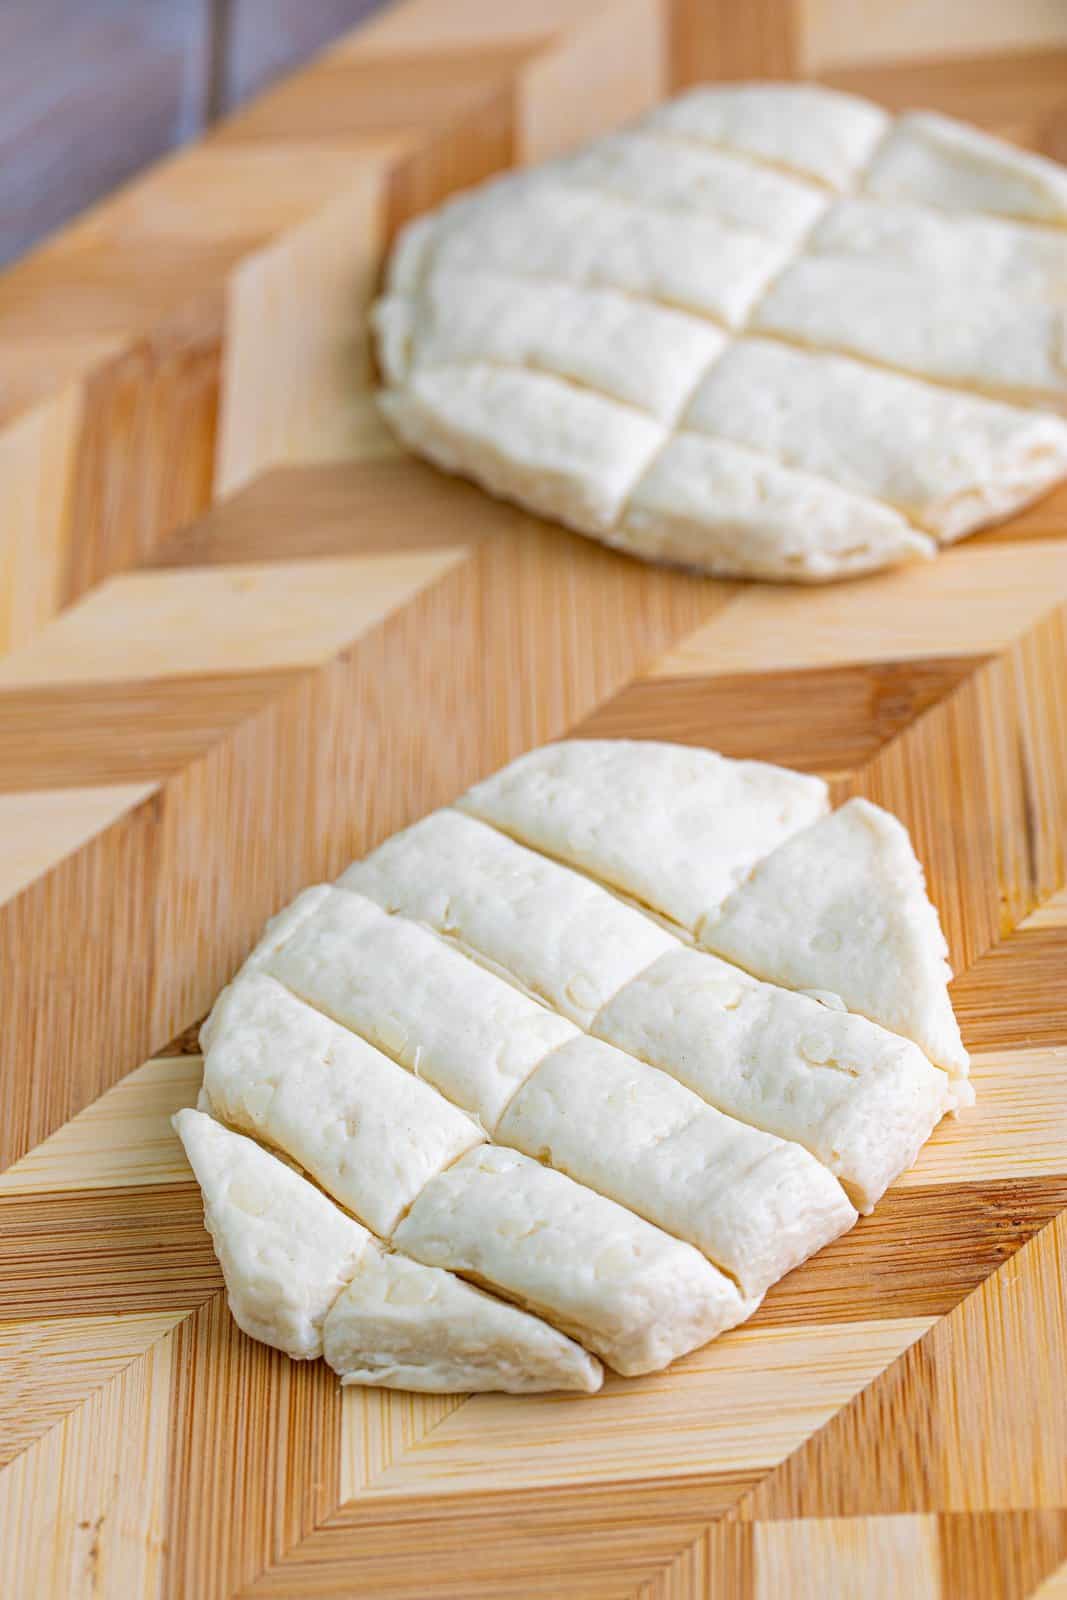 flattened biscuits that have been cut into 10 strips.